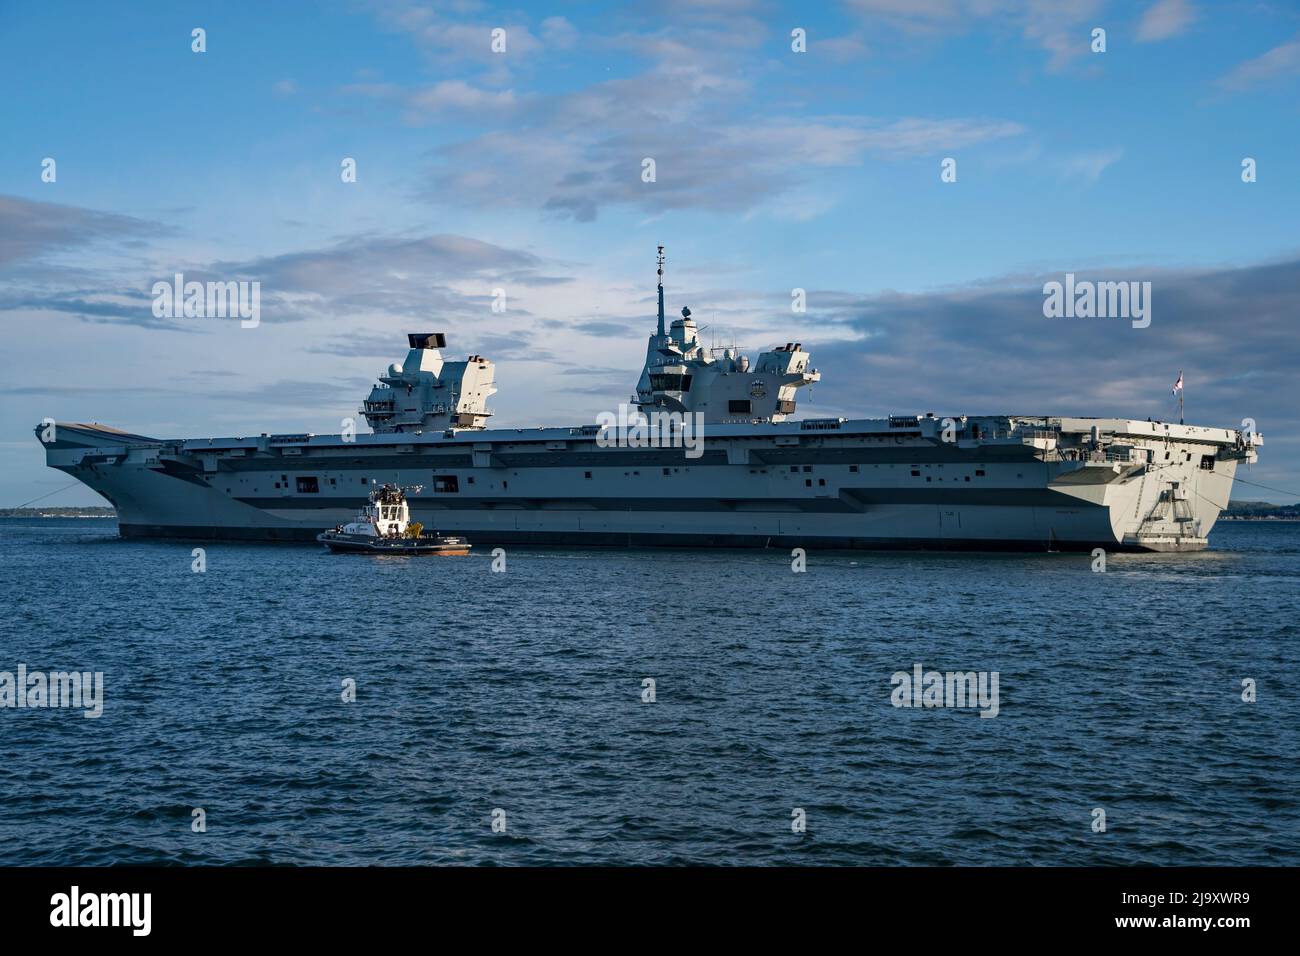 The Royal Navy aircraft carrier HMS Prince of Wales (R09) departed Portsmouth, UK on the evening of 23/5/2022 to resume NATO command ship duties. Stock Photo